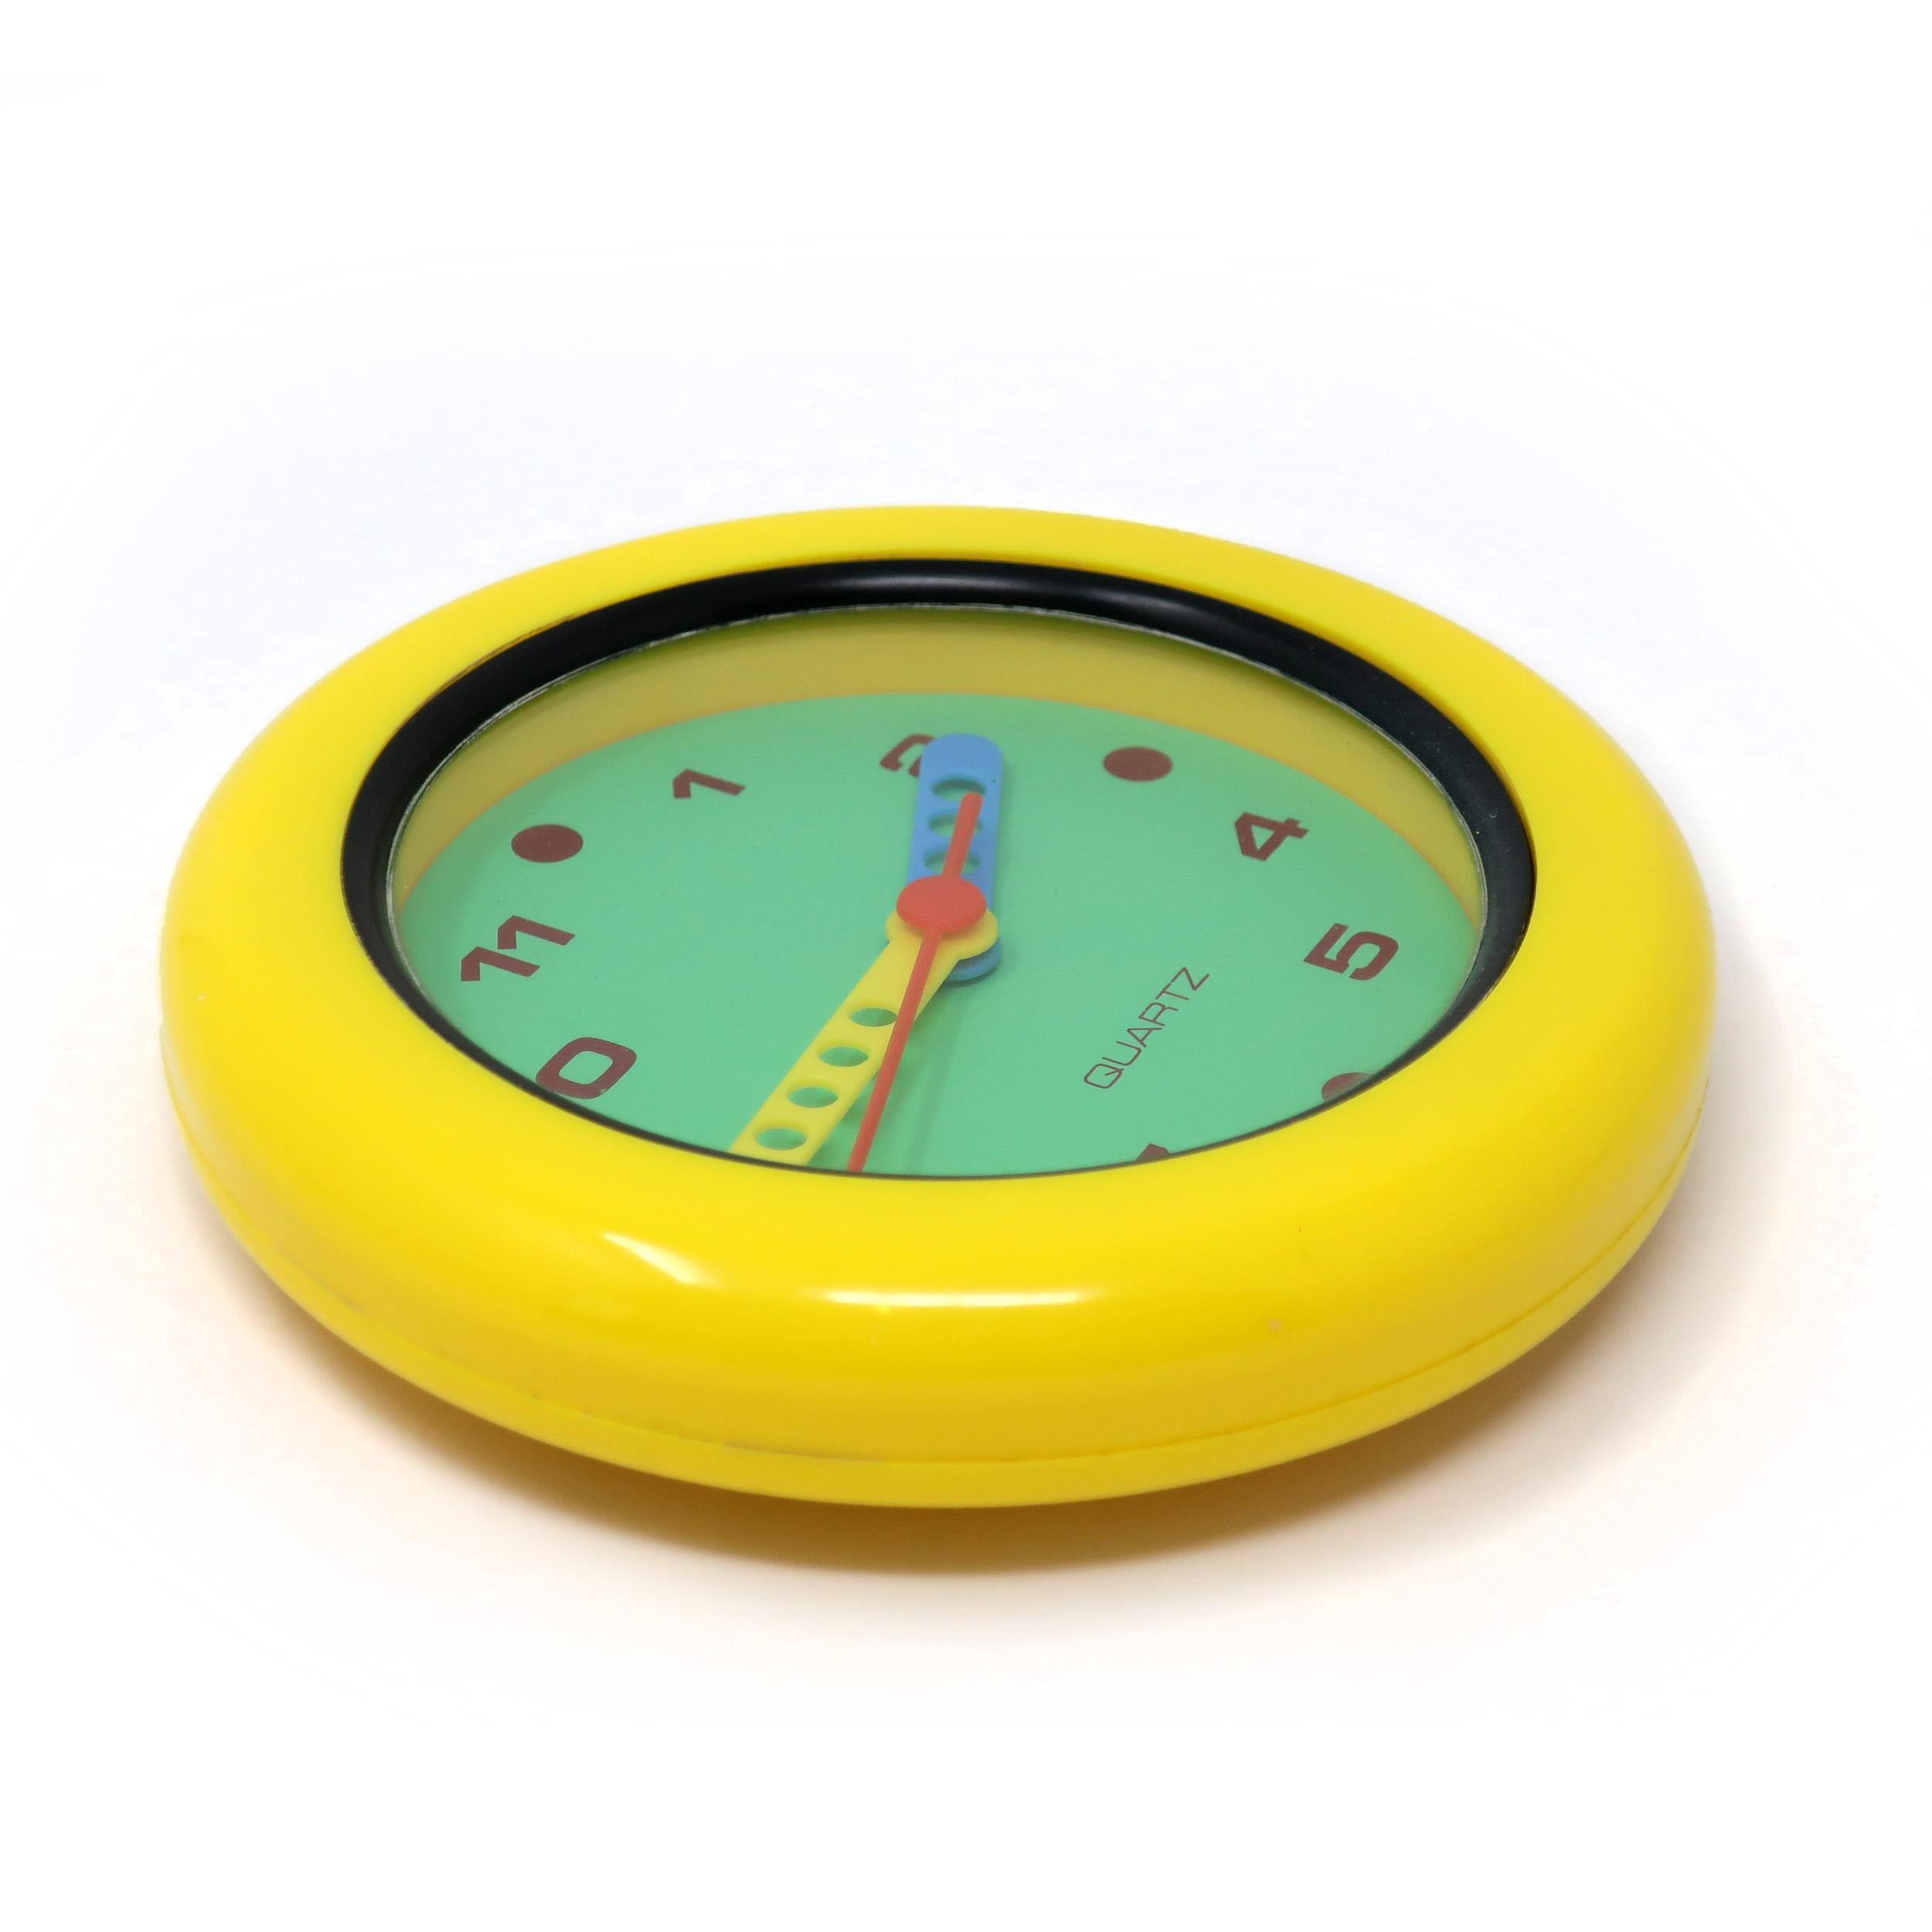 A 1980s wall clock with all of the hallmarks of postmodern and Memphis-inspired design: yellow case with black trim, green face, hands in blue, yellow and red, and black numbers.

In very good vintage condition with wear consistent with age and